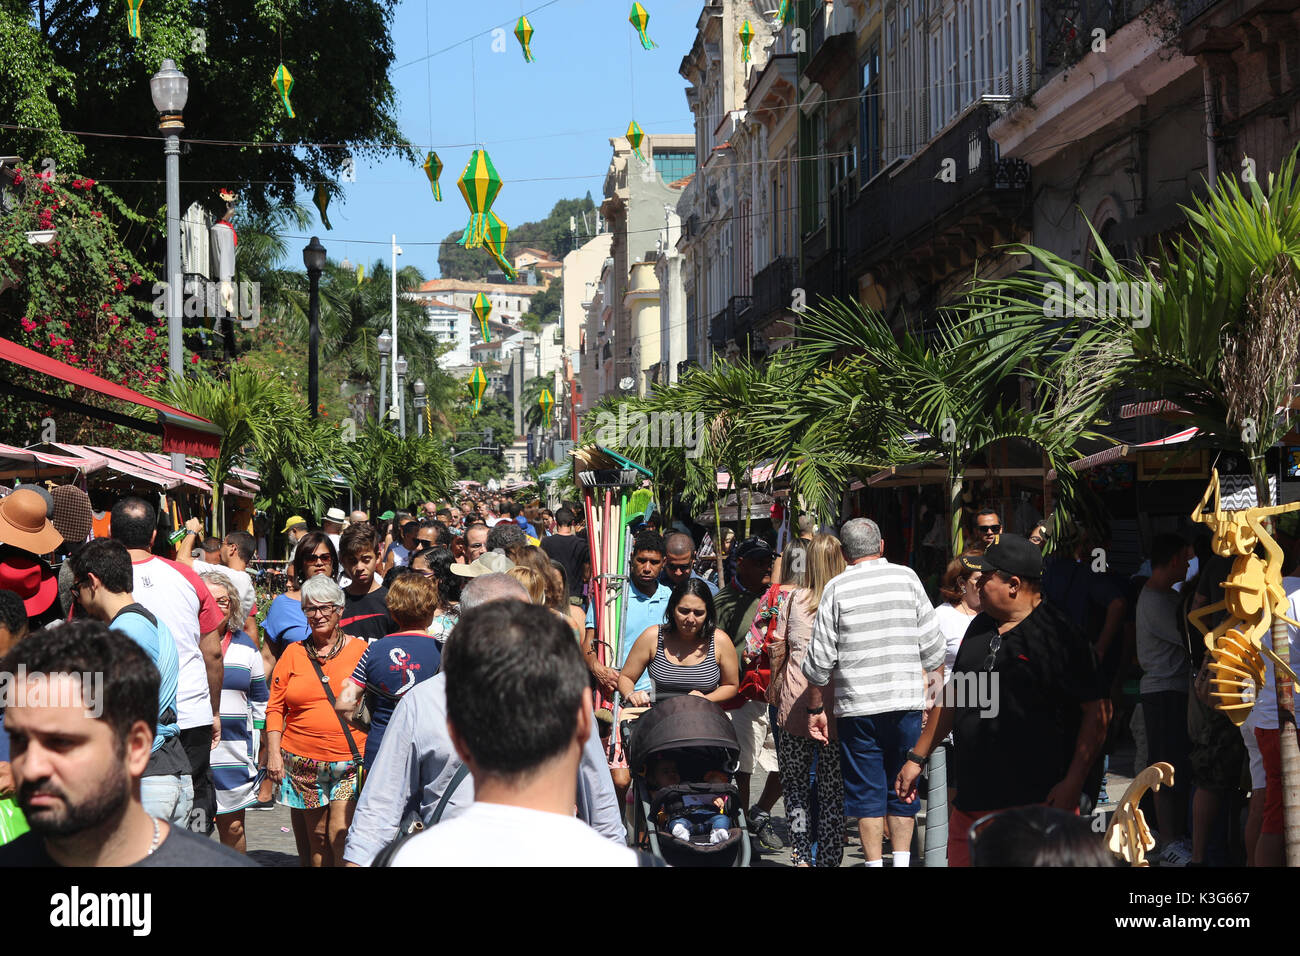 Rio de Janeiro, Brazil, September 02, 2017: Hundreds of collectors of antiques, artisans and artists exhibit their products in tents along Rua do Lavradio, one of the oldest streets in the center of Rio. people take advantage of the cultural program for shopping and also to enjoy the gastronomy of the restaurants of the region of Lapa, where the fair happens. Crowd at the antique fair. Credit: Luiz Souza/Alamy Live News Stock Photo